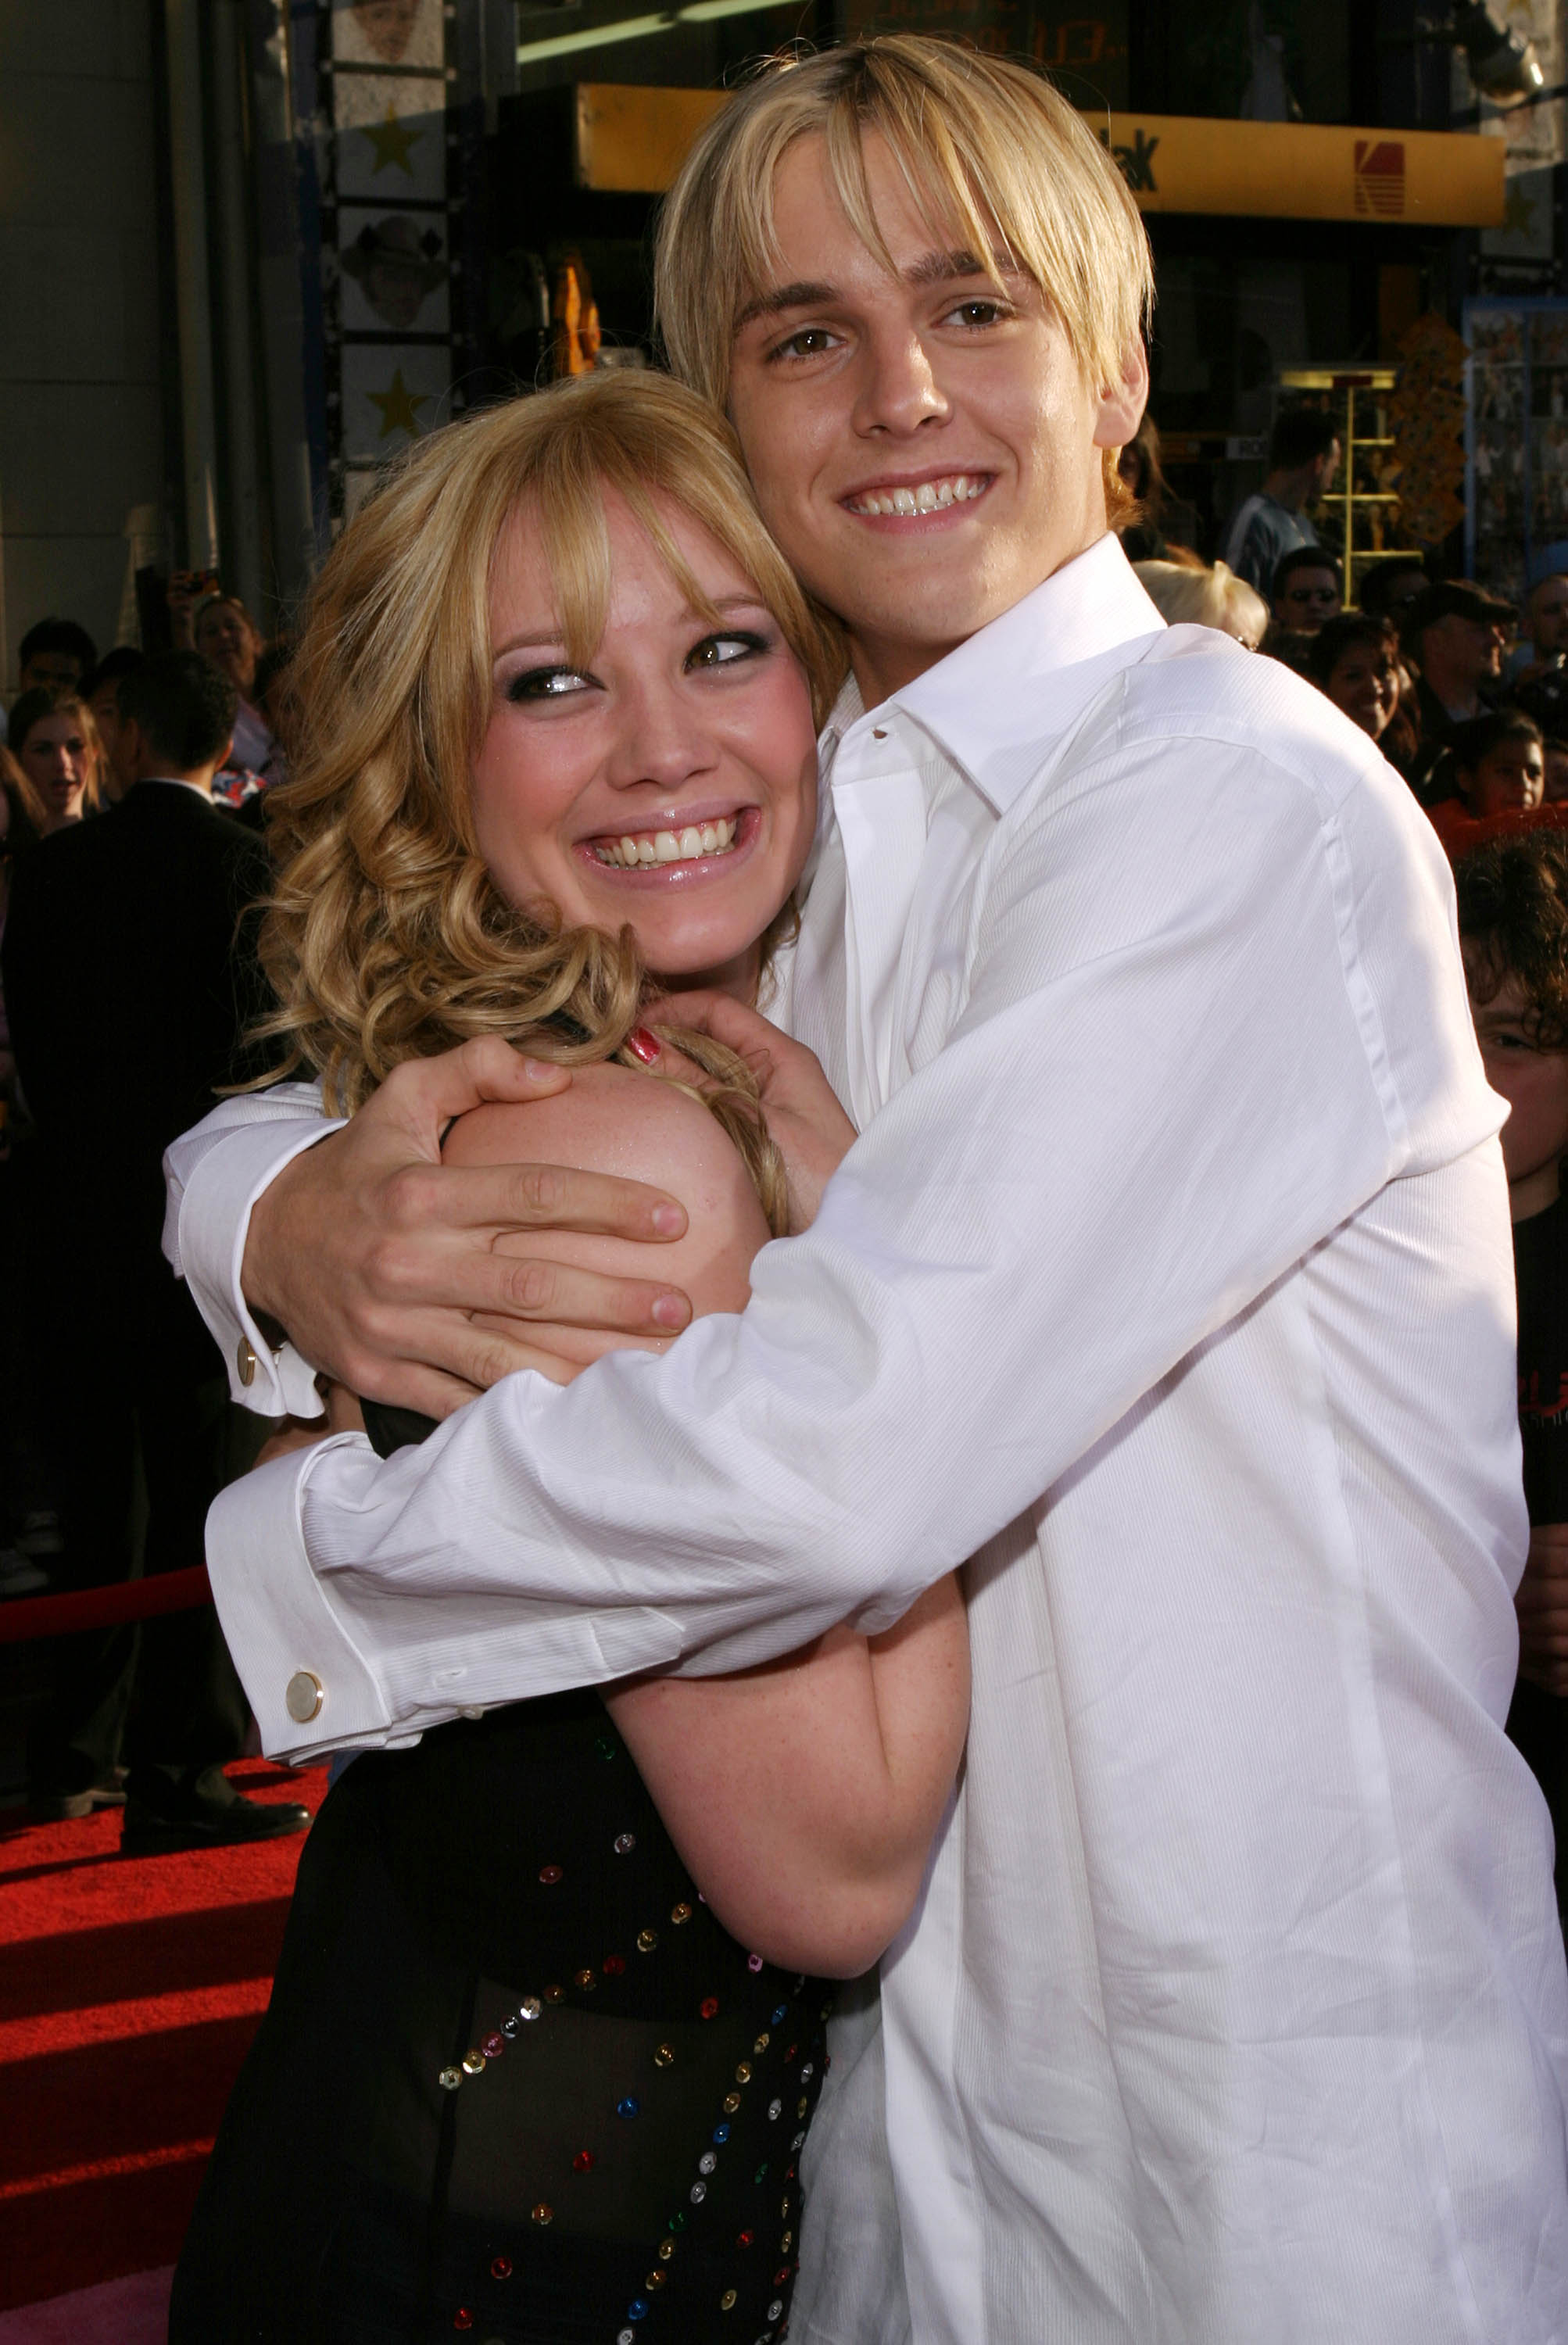 Hilary Duff and Aaron Carter at 'The Lizzie McGuire Movie' premiere on April 26, 2003 (Chris Polk—FilmMagic)